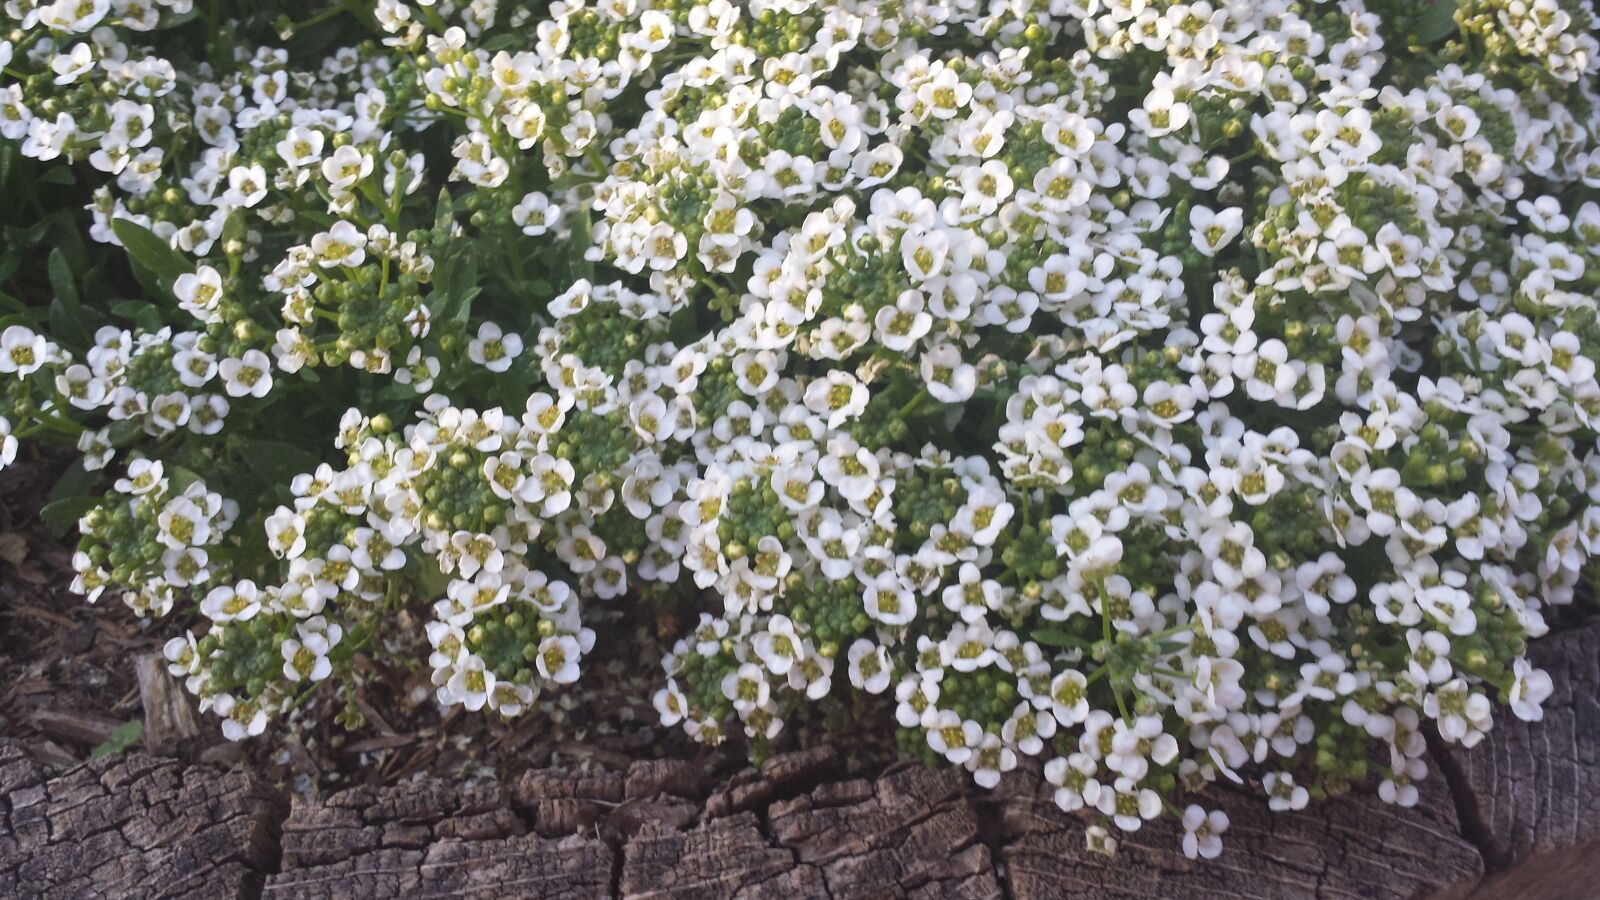 Samsung Galaxy S4 sample photo. White, flowers, nature photography